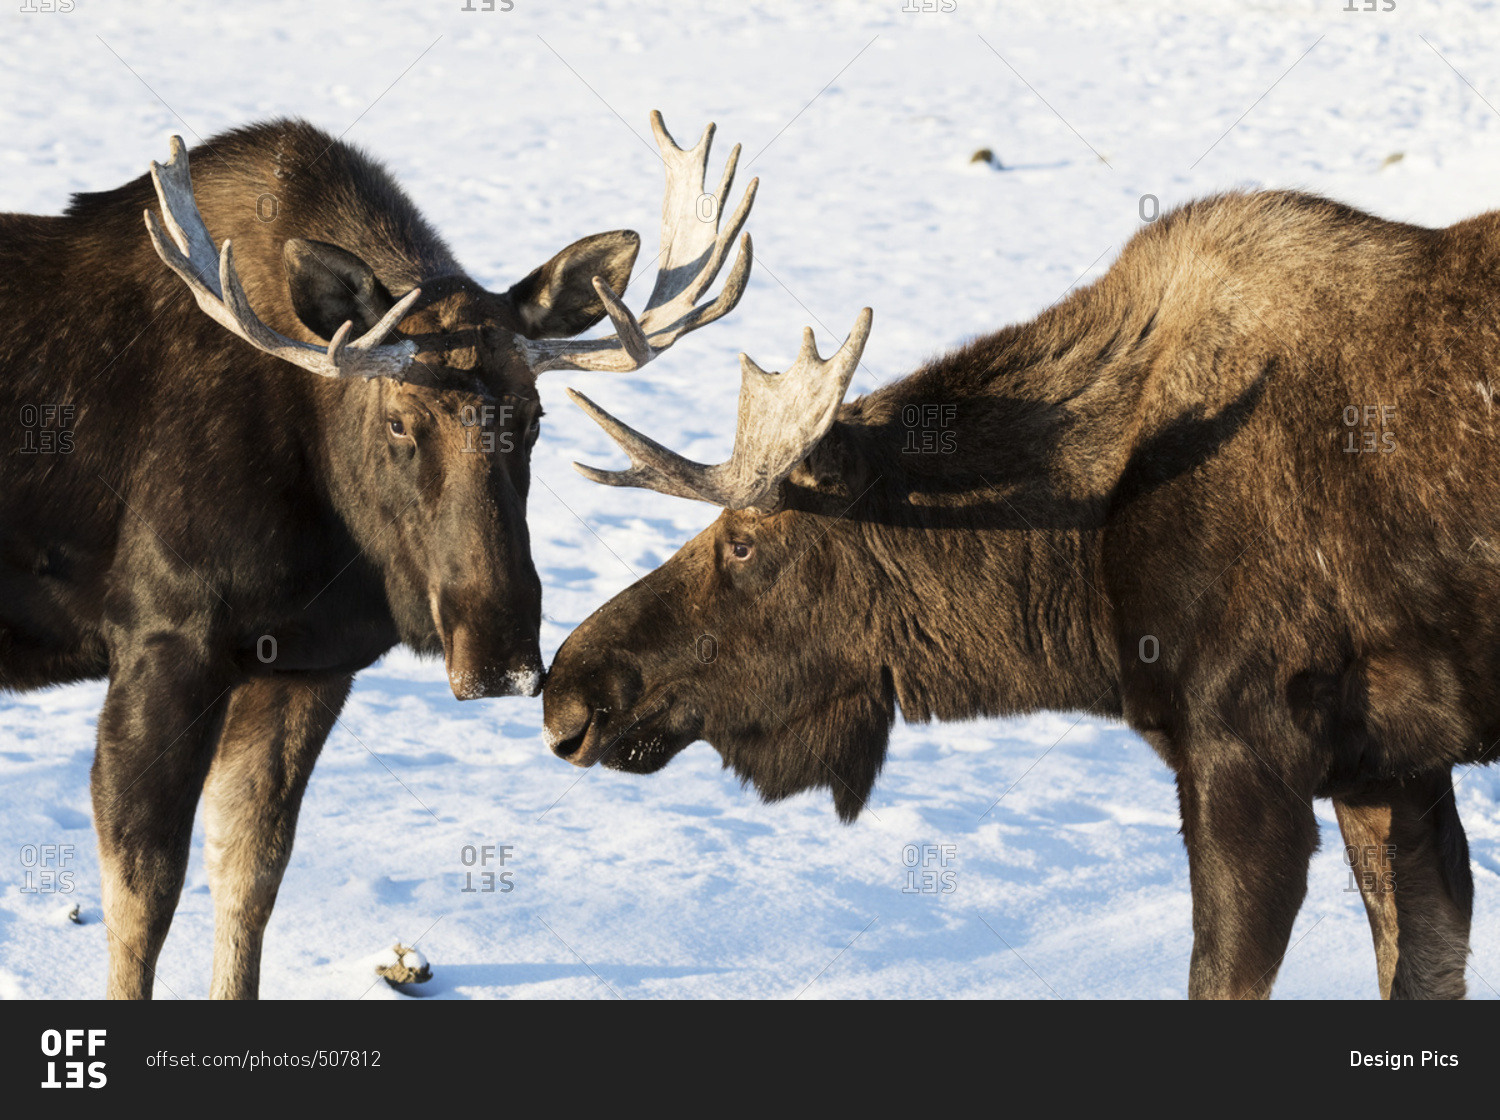 Moose (alces alces)touch noses in a greeting to one another, South-central Alaska; Alaska, United States of America